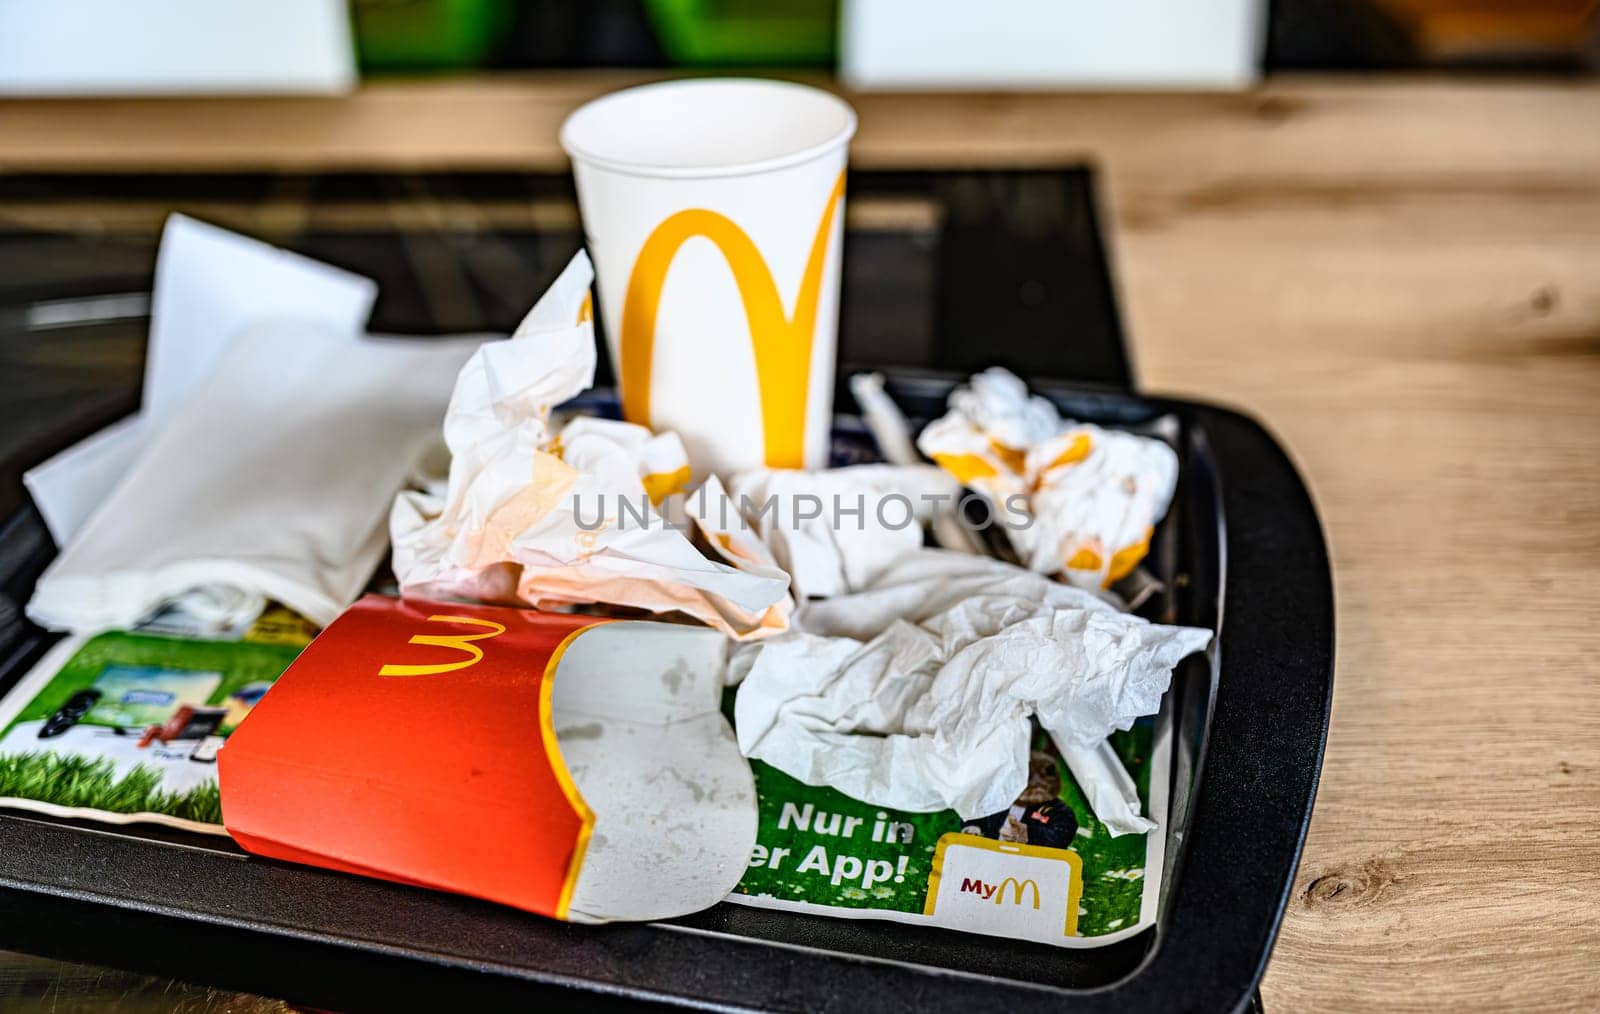 Berlin, Germany - 10 April 2023: trash after food on a tray on a table inside the restaurant McDonald's